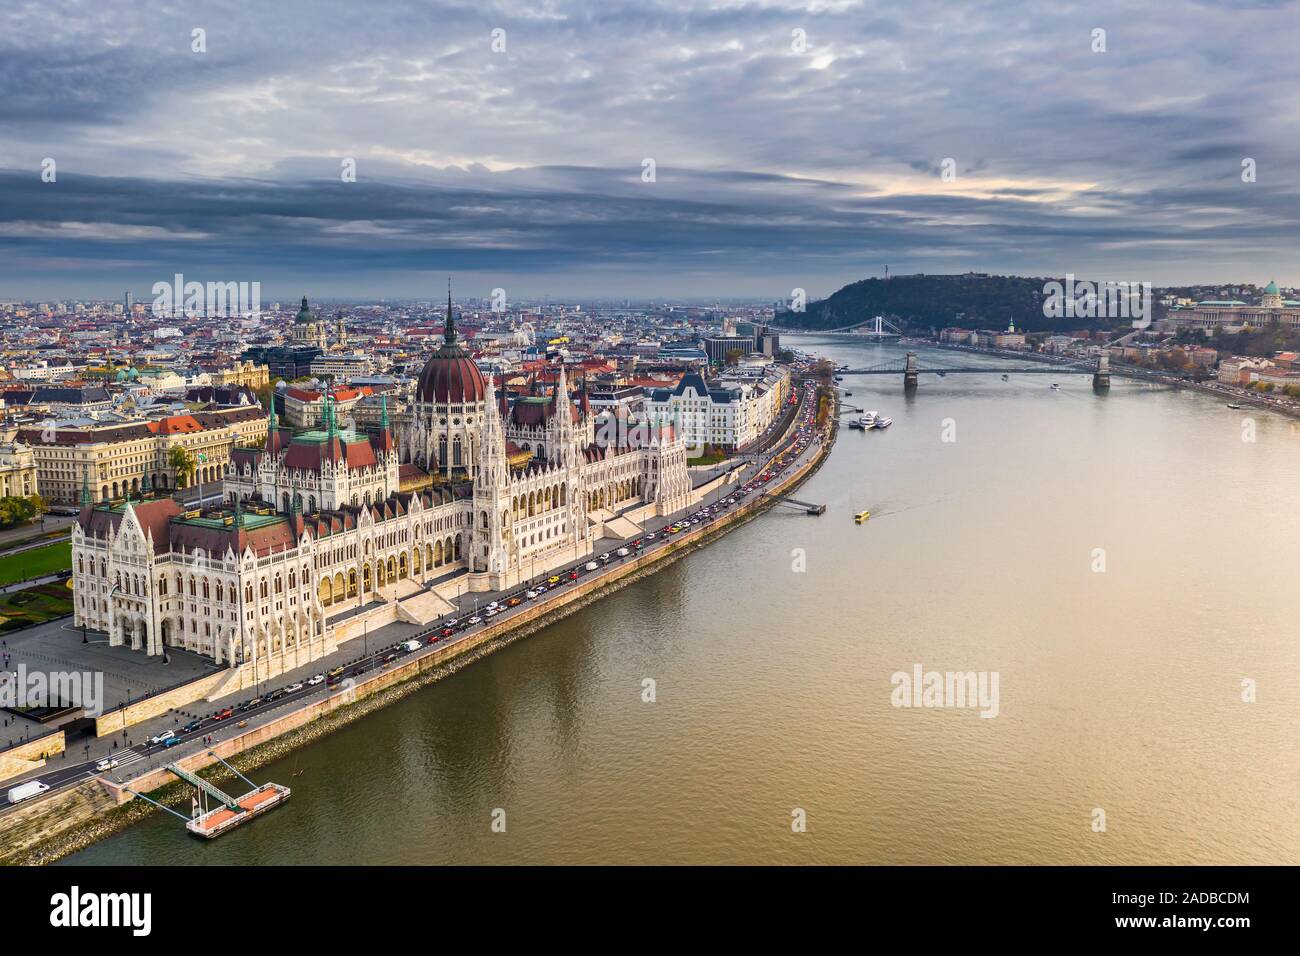 Budapest, Hungary - Aerial view of the beautiful Parliament of Hungary at sunset with golden lights and sightseeing boats on River Danube. Szechenyi C Stock Photo